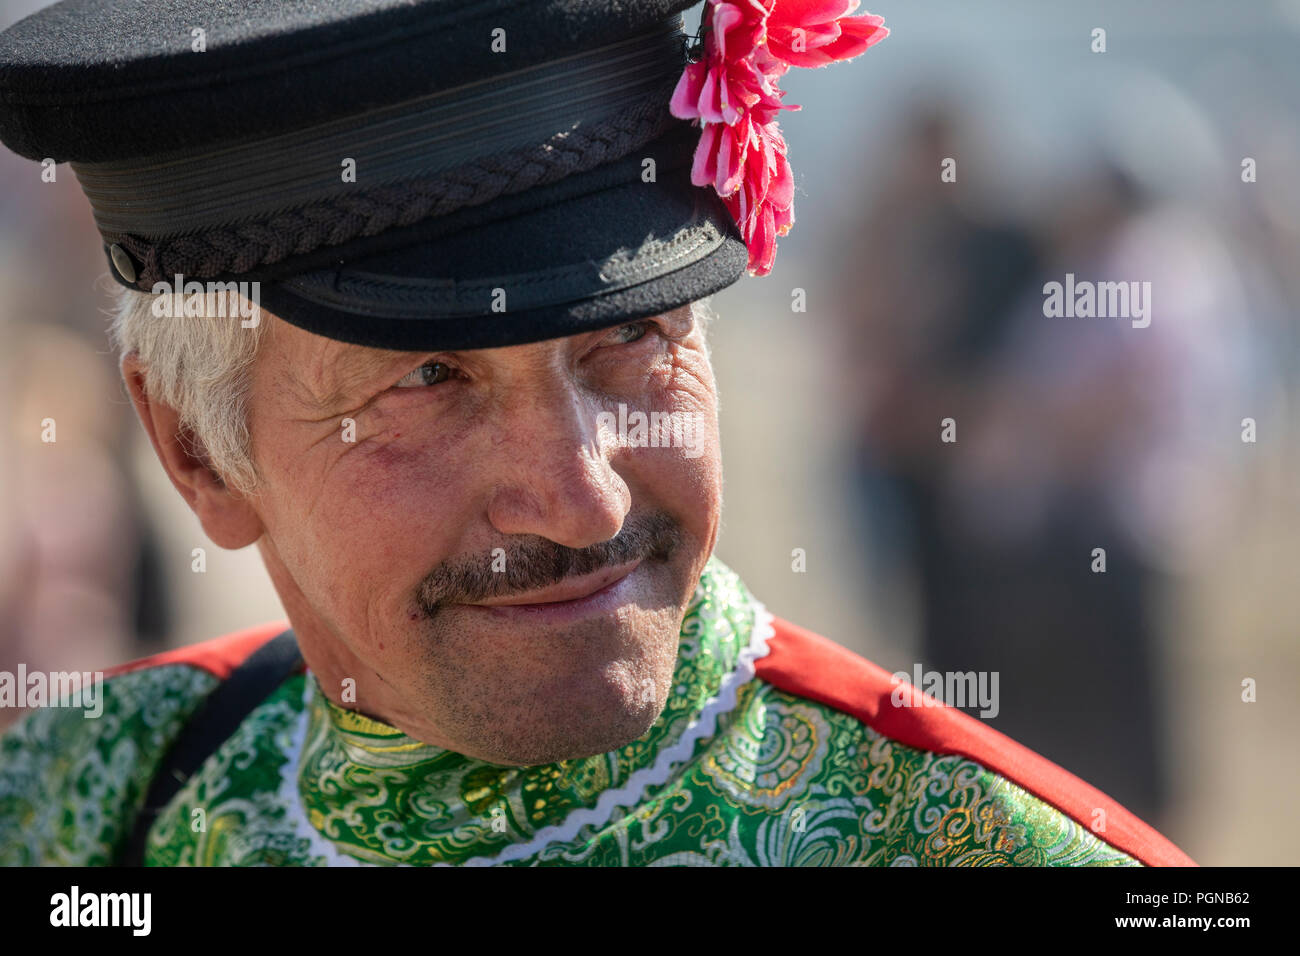 A rural man in a dandy cap with a flower in Atmanov Ugol village of the Tambov region during a rural holiday, Russia Stock Photo